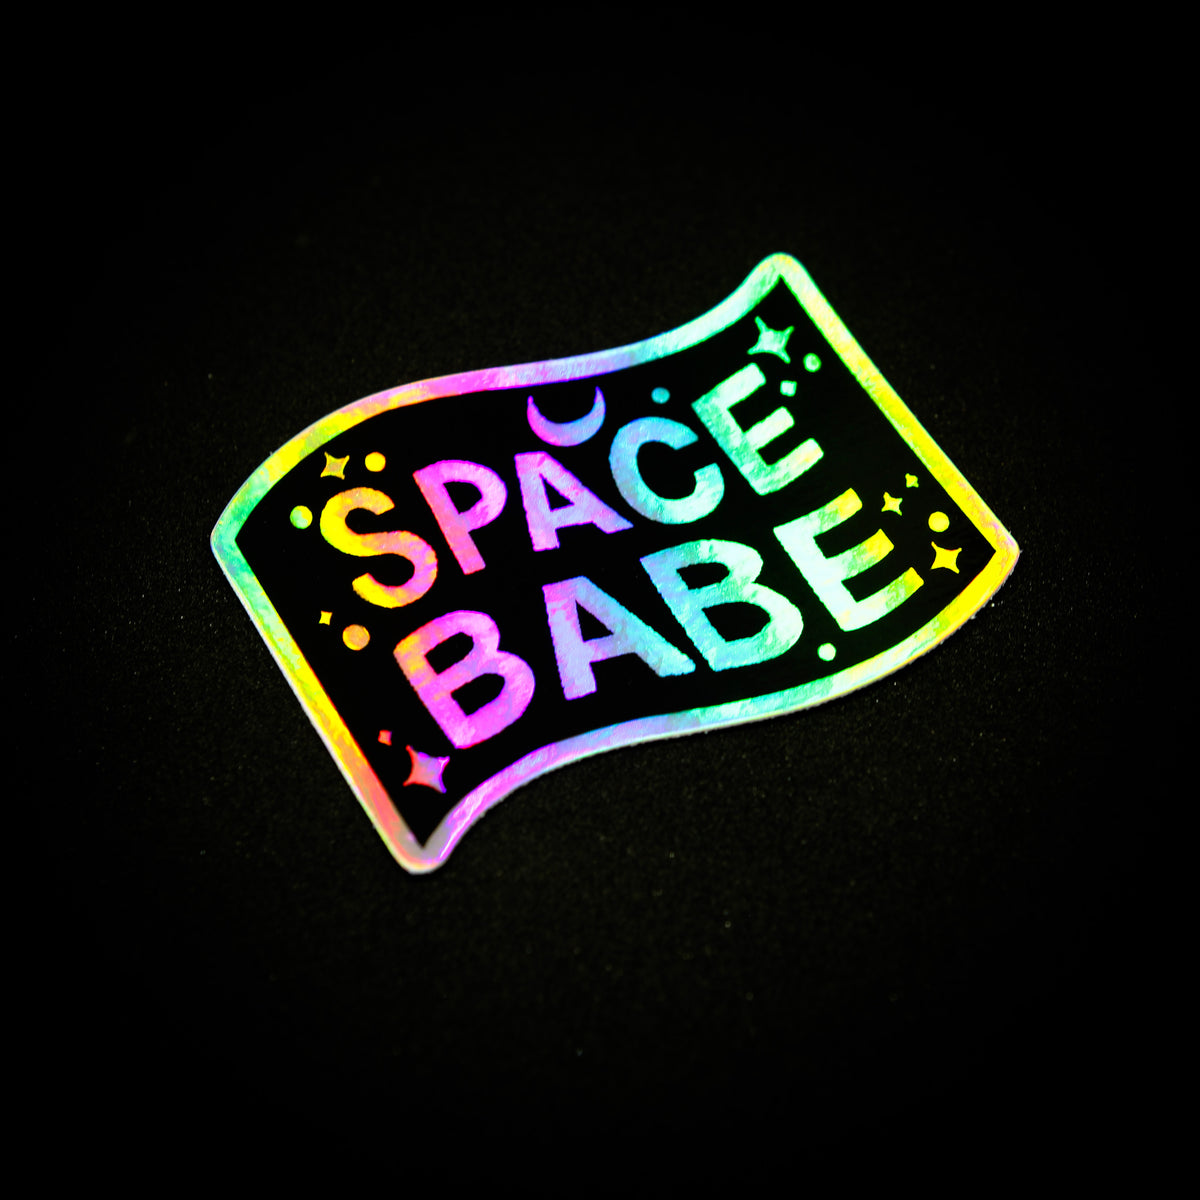 Space Babe Holographic Sticker